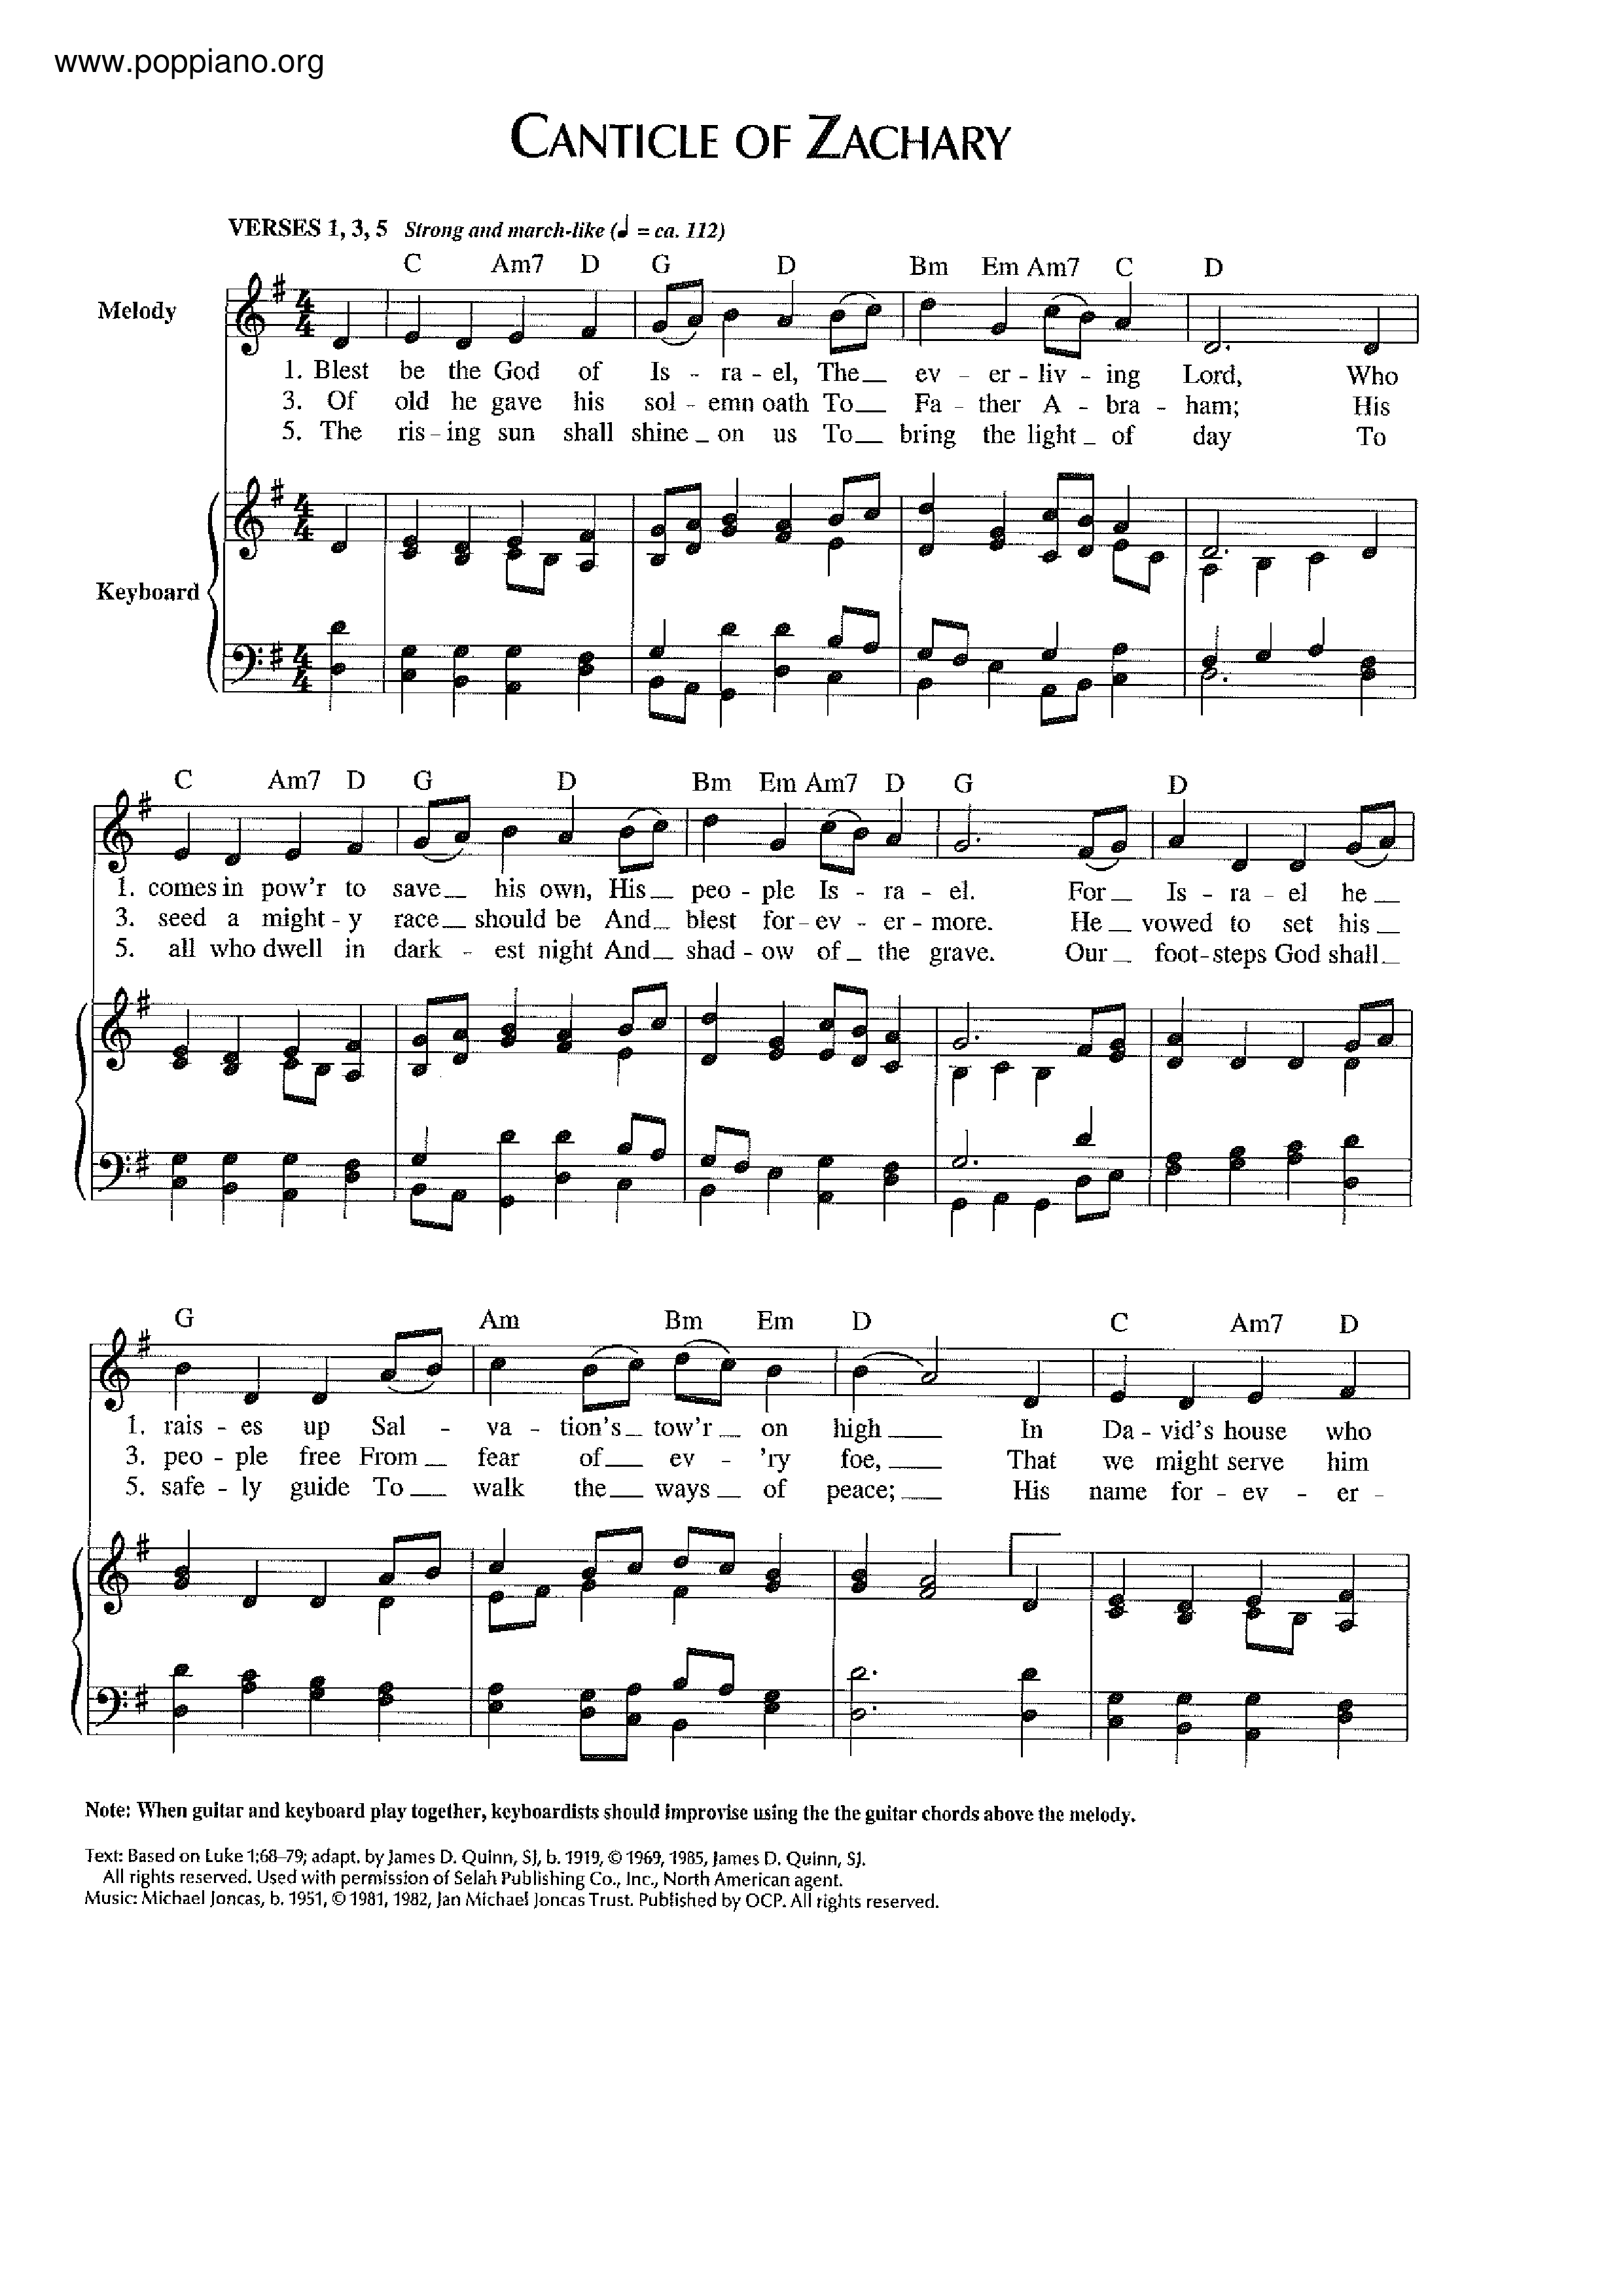 Canticle Of Zachary Score